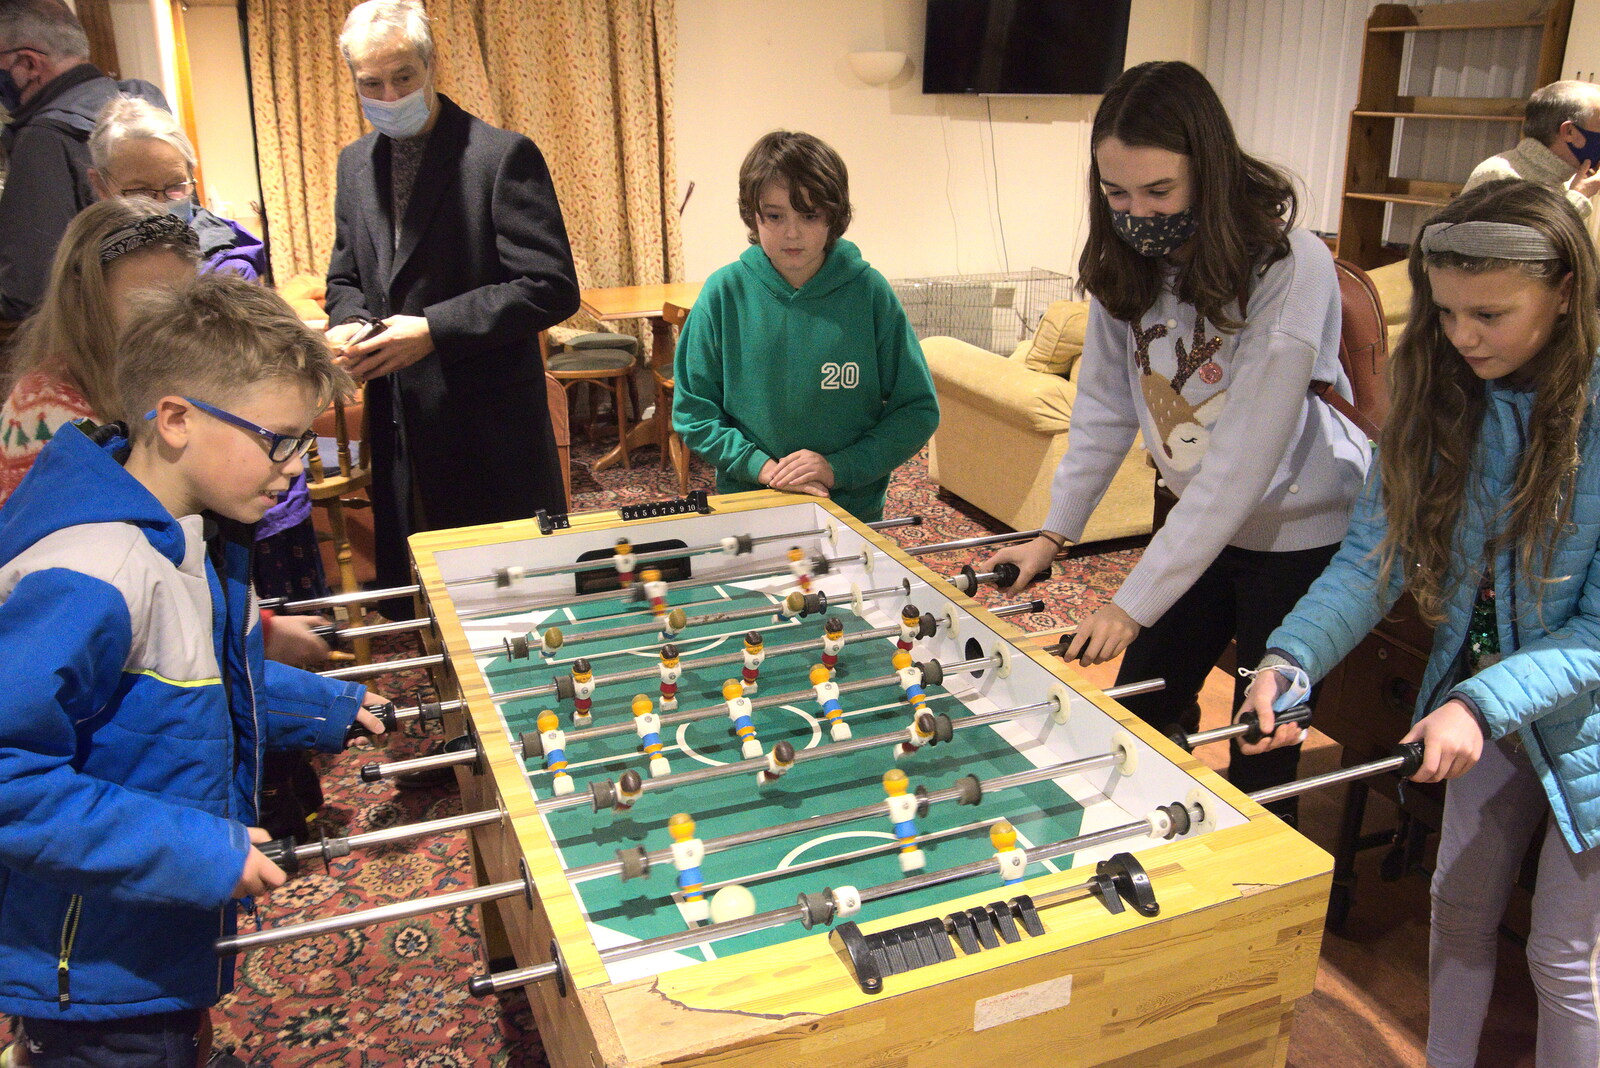 Fred watches some table football from Dove Players' Trouble in Pantoland, Eye Community Centre, Suffolk - 11th December 2021